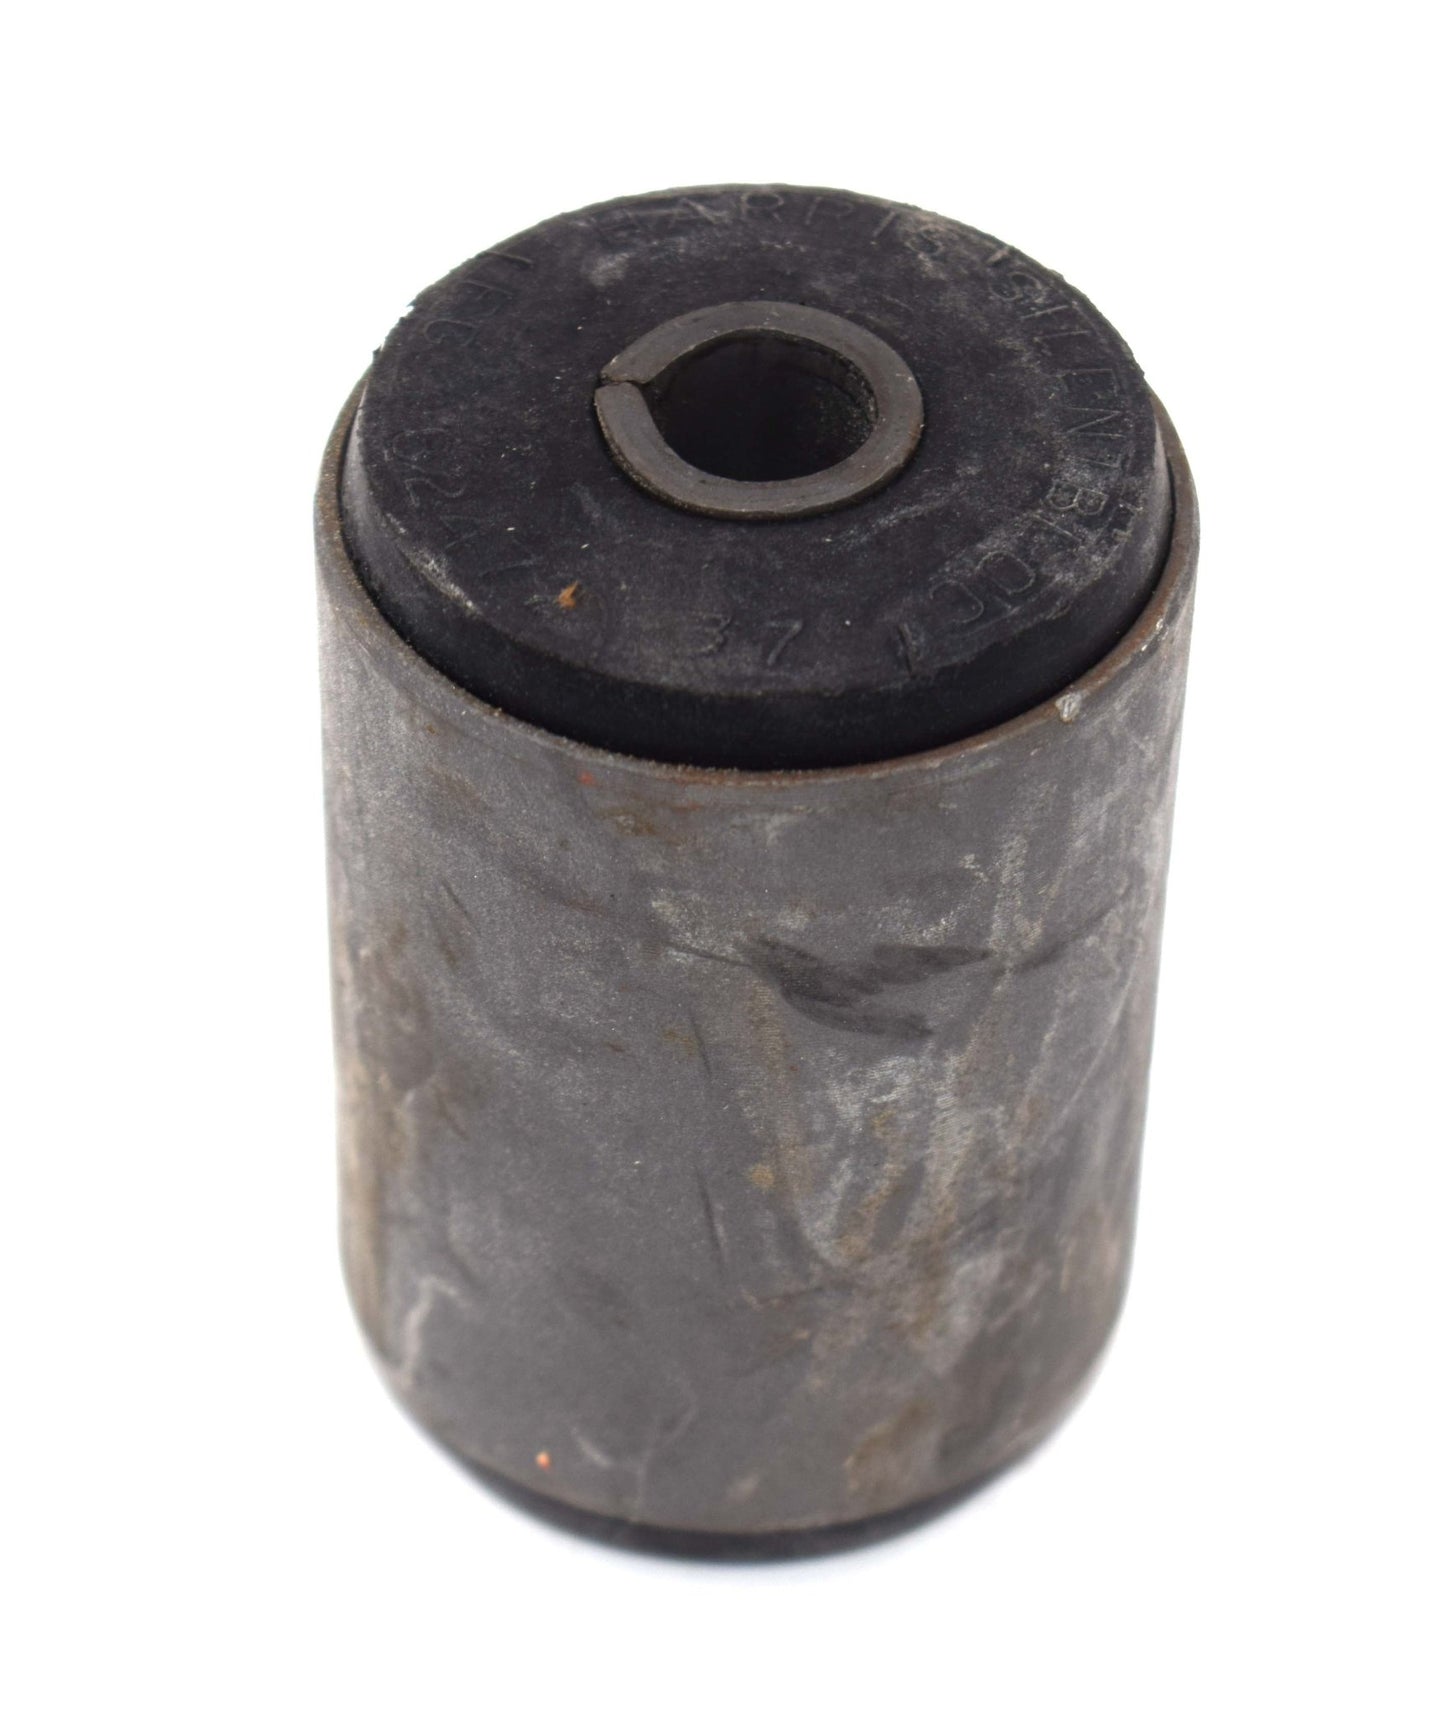 Bushing, Rear Spring, 2 1/2", Fixed End, 1967-1973 Jeepster Commando and Commando - The JeepsterMan